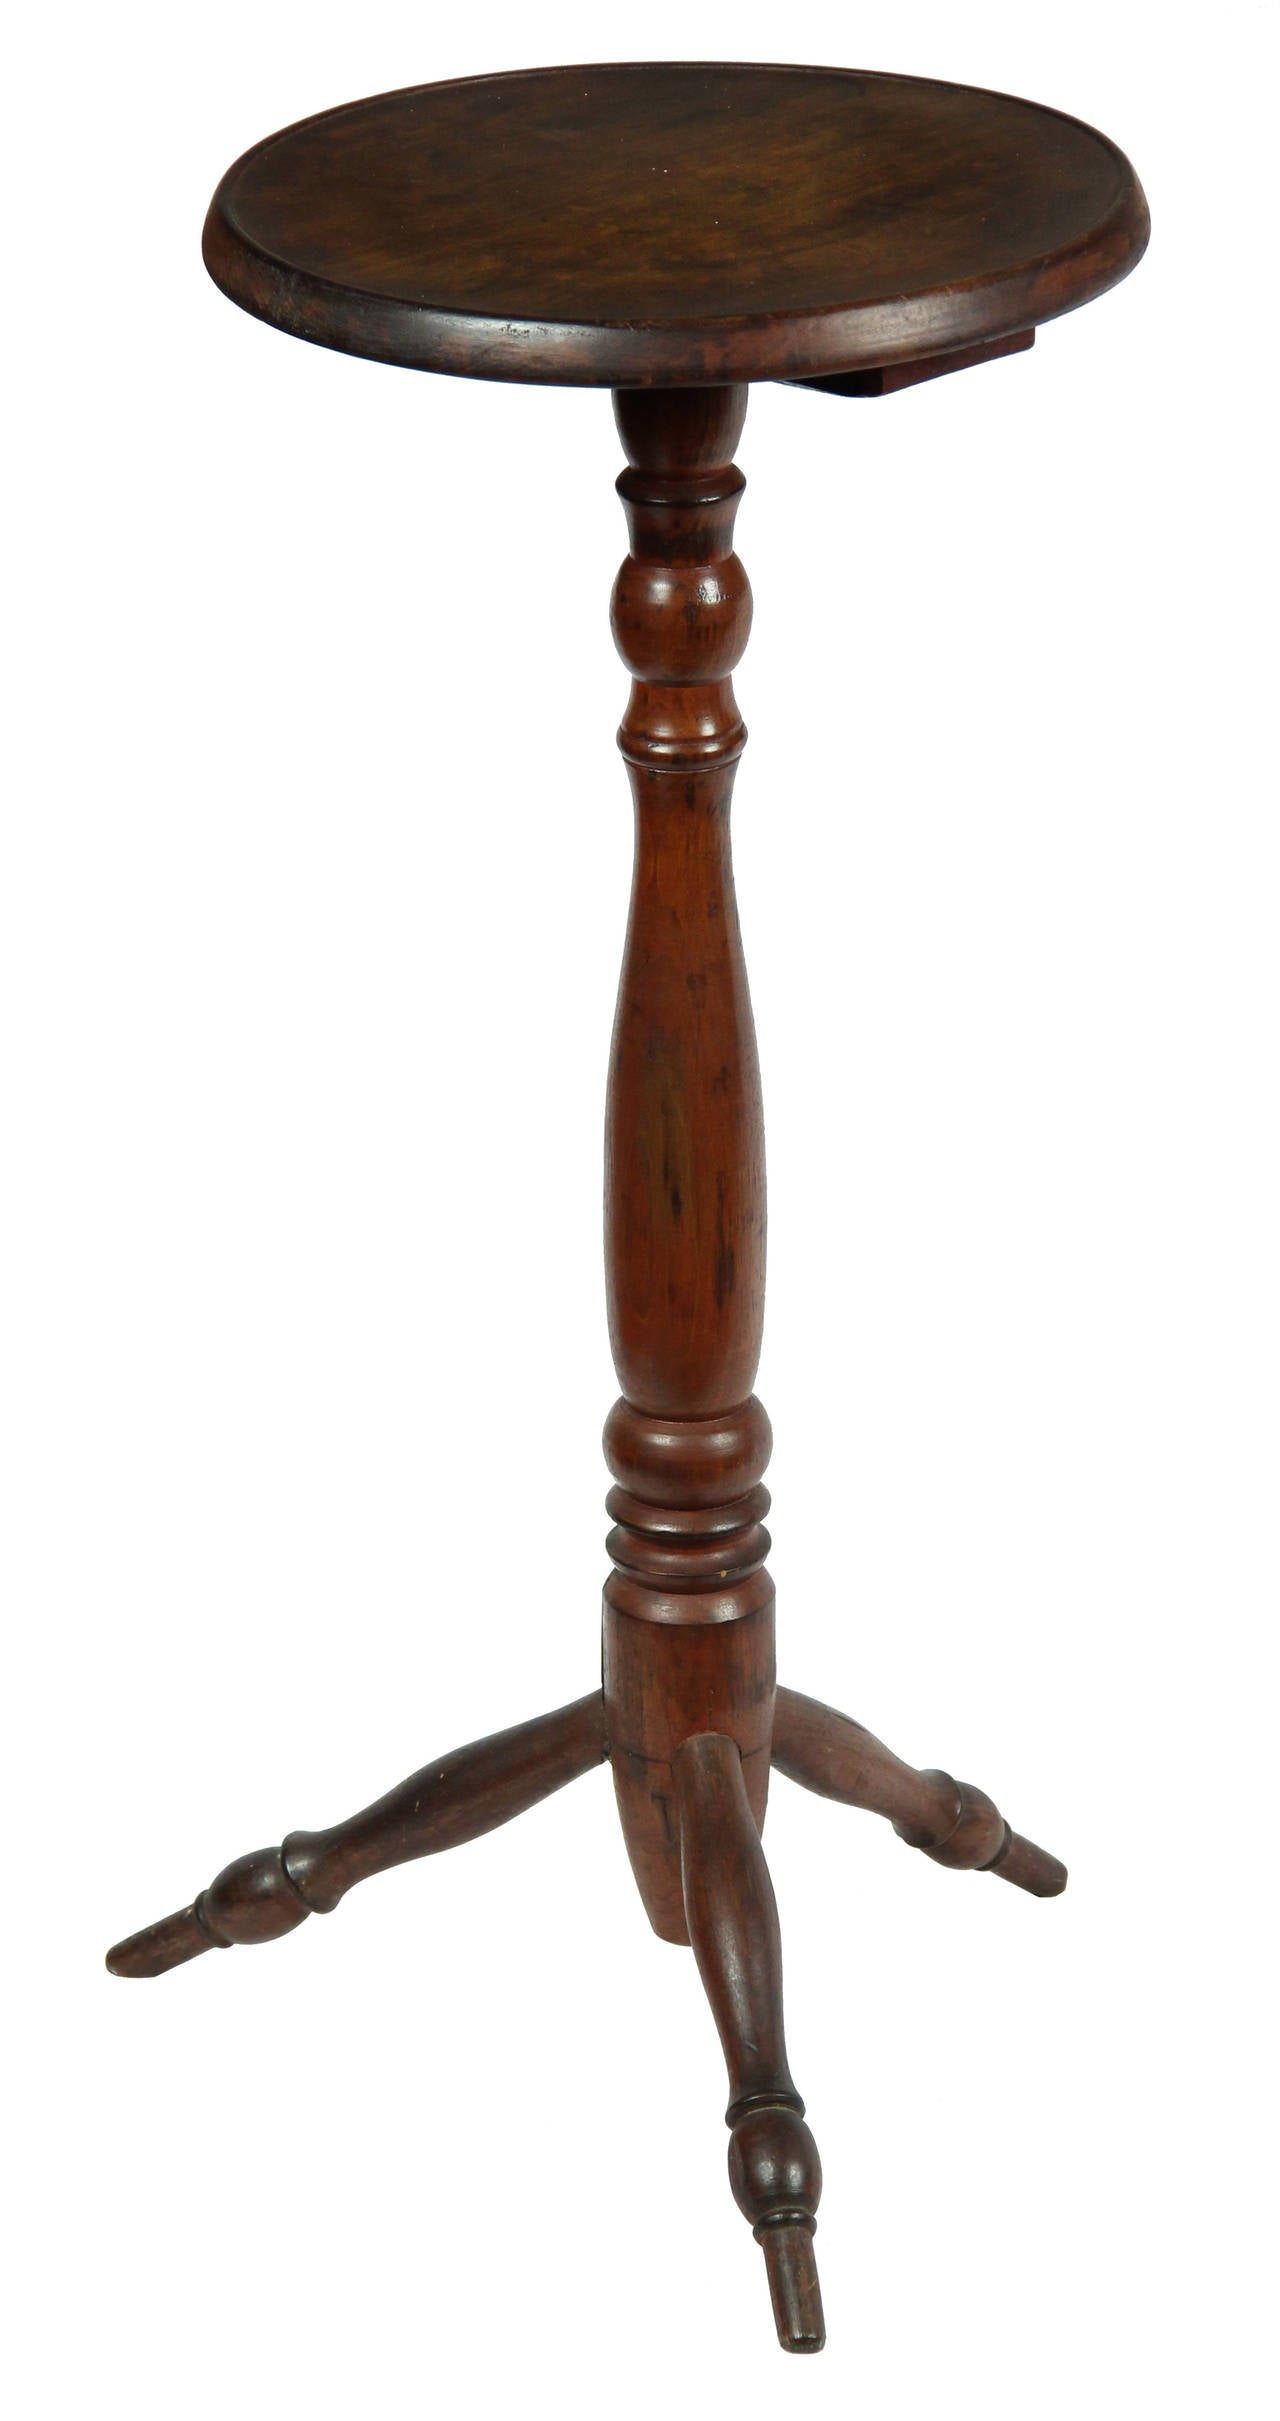 William and Mary Rare Pennsylvania Walnut William & Mary Turned Candle Stand, circa 1730 For Sale